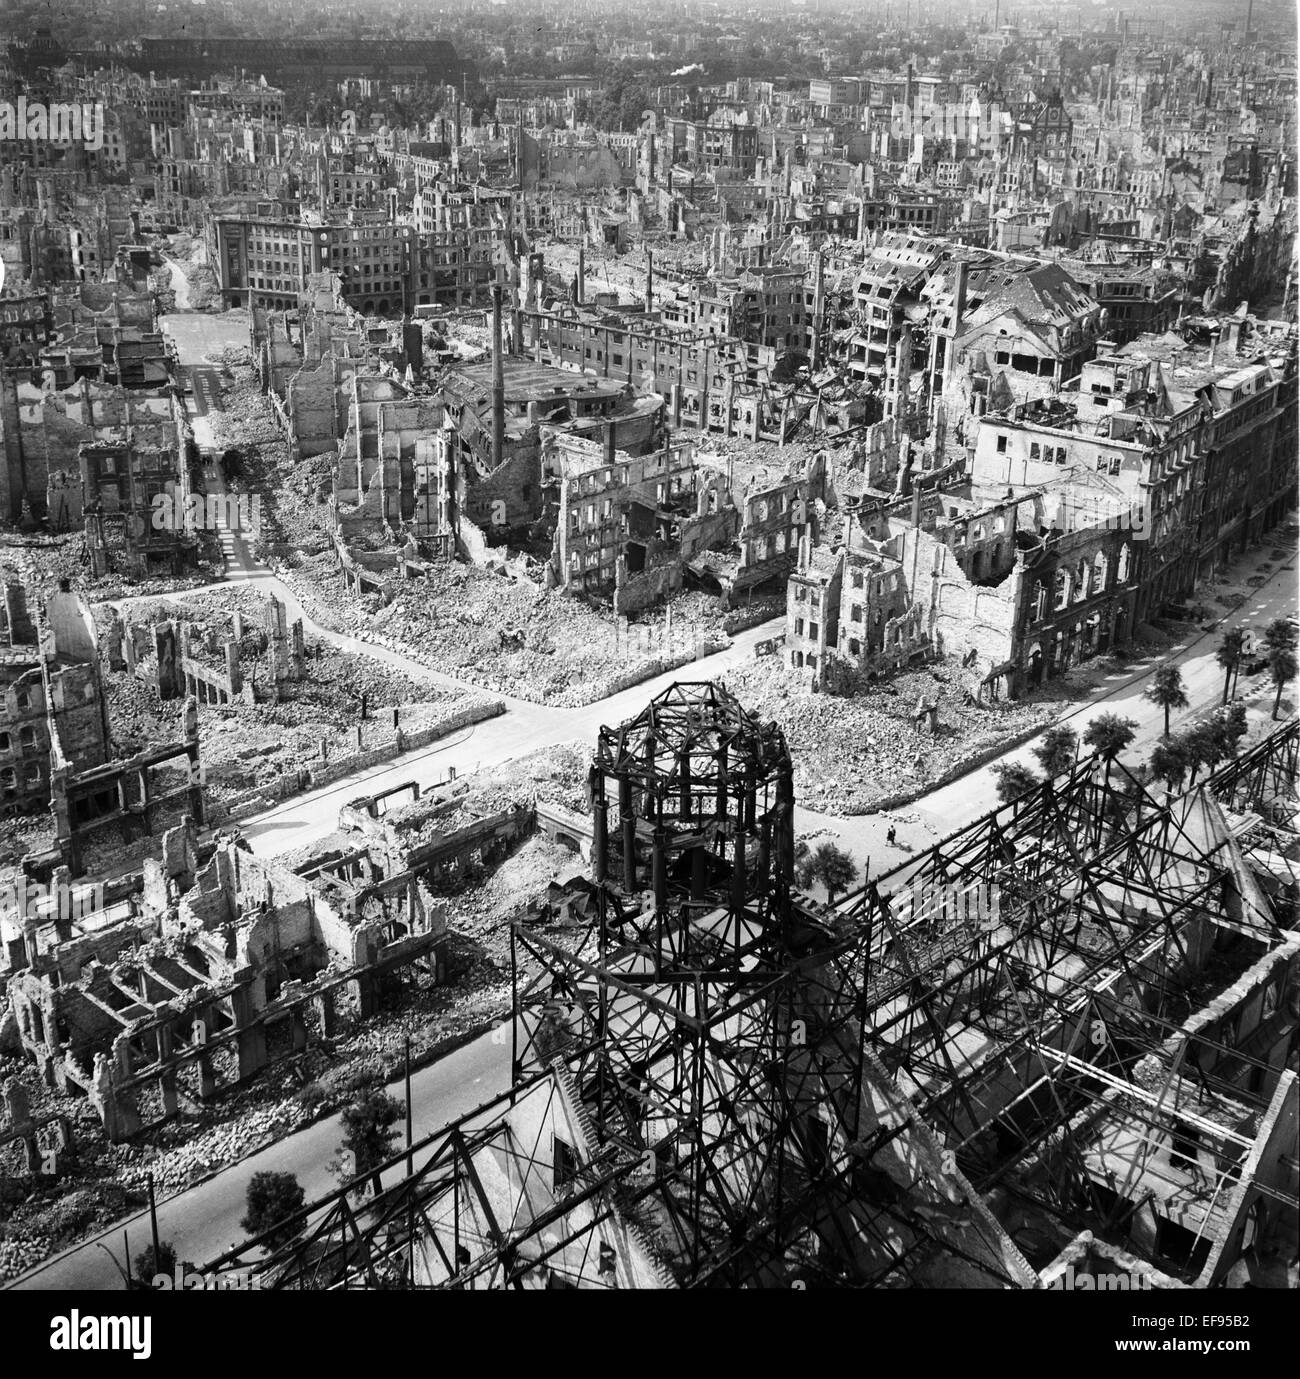 The photo by famous photographer Richard Peter sen. shows the view from the Town Hall Tower over the destroyed city of Dresden towards Southwest. The photo was taken after 17 September 1945. Especially the Allied air raids between 13 and 14 February 1945 led to extensive destructions of the city.  Photo: Deutsche Fotothek / Richard Peter sen. - NO WIRE SERVICE Stock Photo